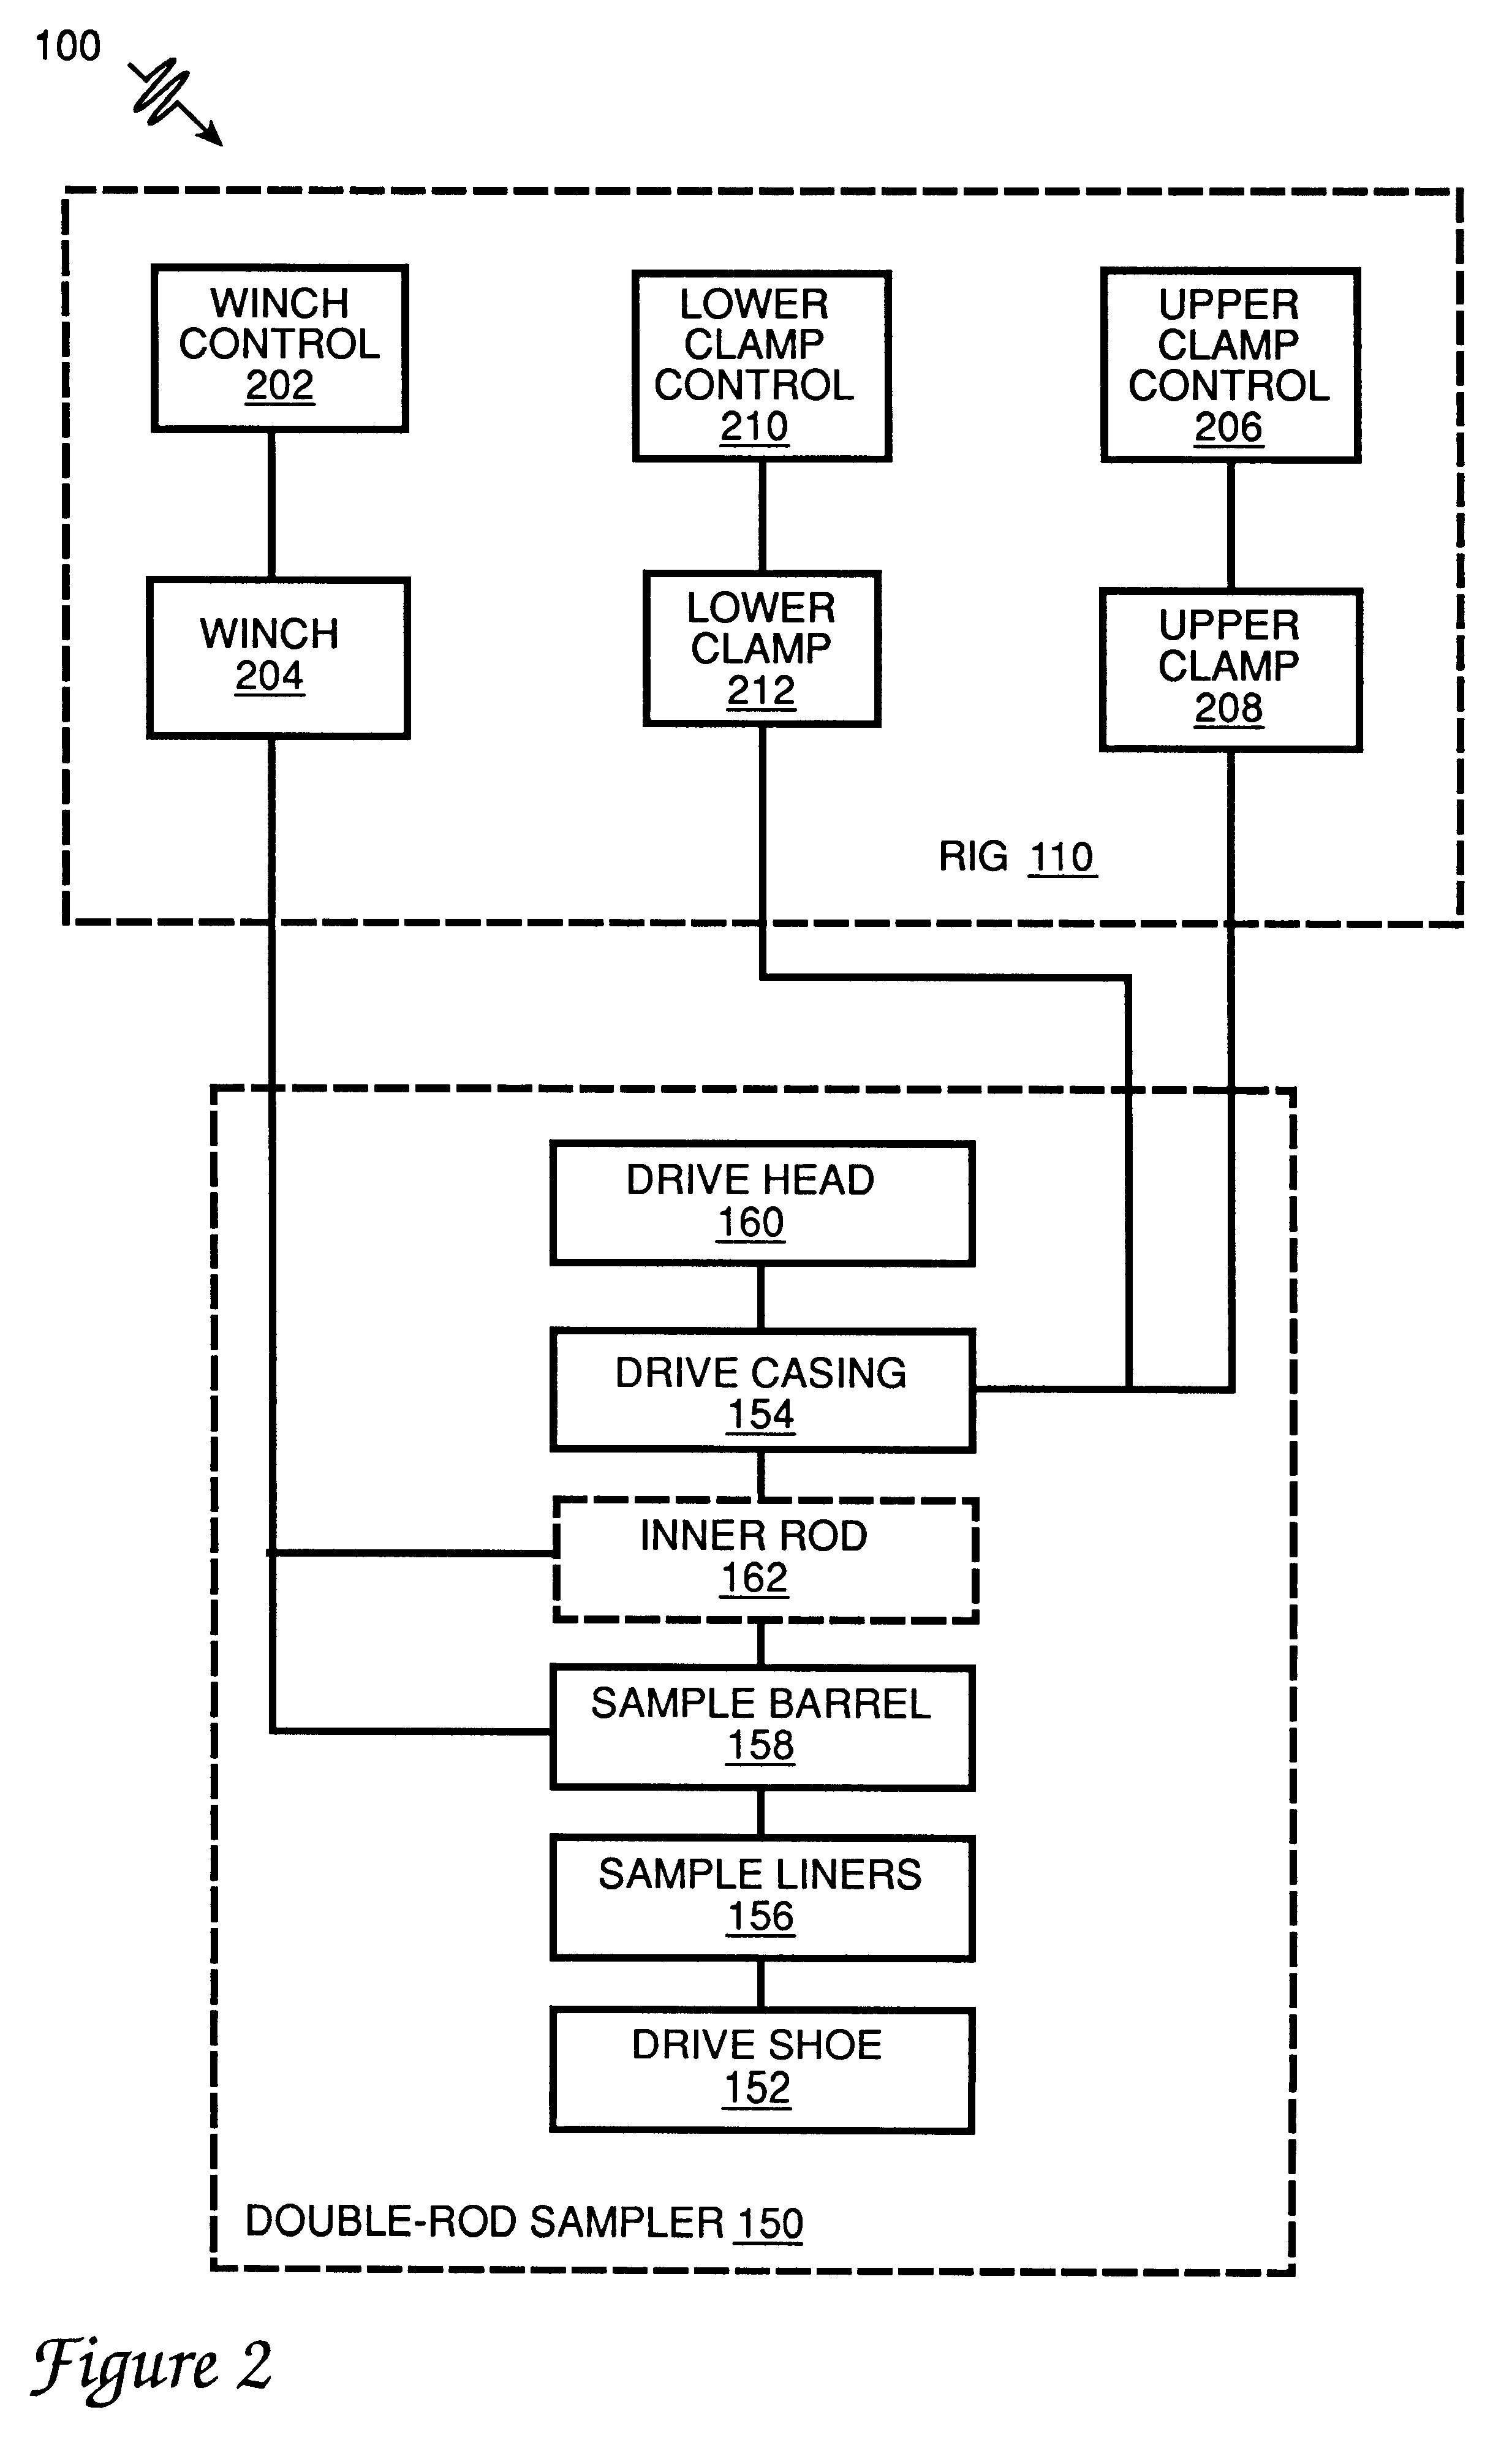 Soil sampling system with sample container rigidly coupled to drive casing